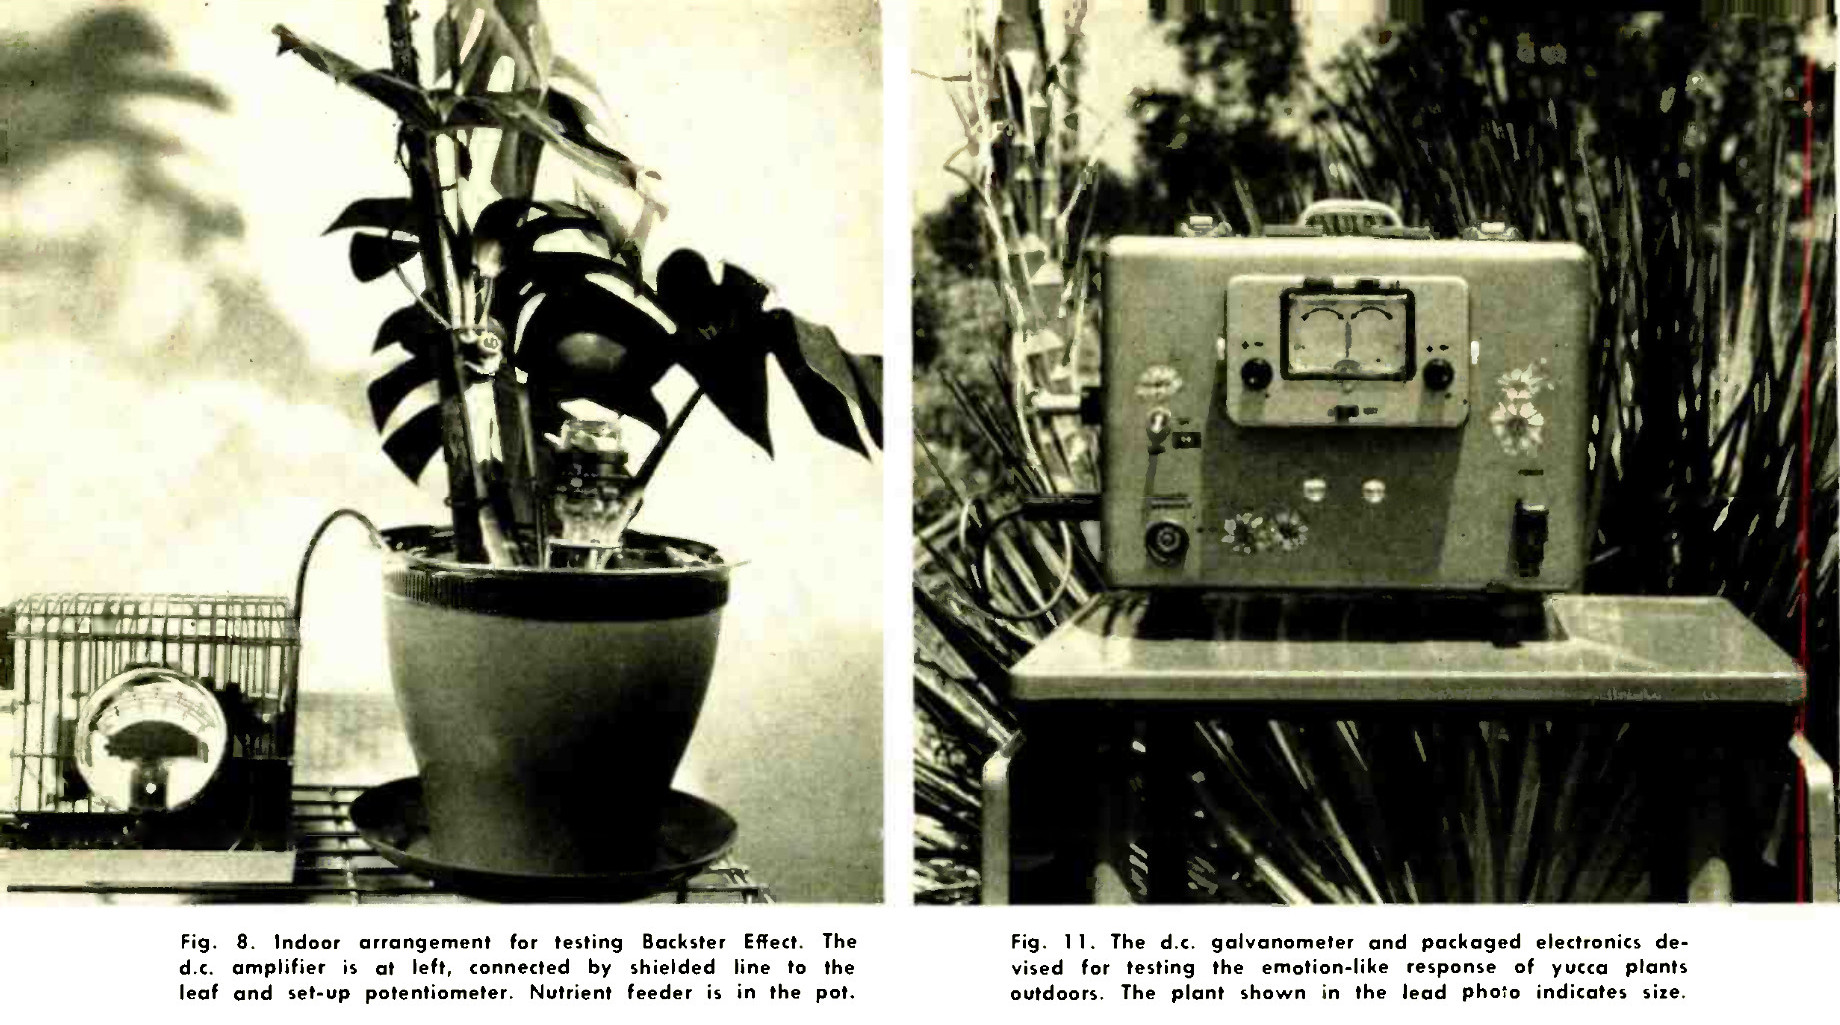 Fig. 8. Indoor arrangement for testing Backster Effect. The d.c. amplifier is at left, connected by shielded line to the leaf and set-up potentiometer. Nutrient feeder is in the pot. :: Fig. 11. The d.c. galvanometer and packaged electronics devised for testing the emotion-like response of yucca plants outdoors. The plant shown in the lead photo indicates size.